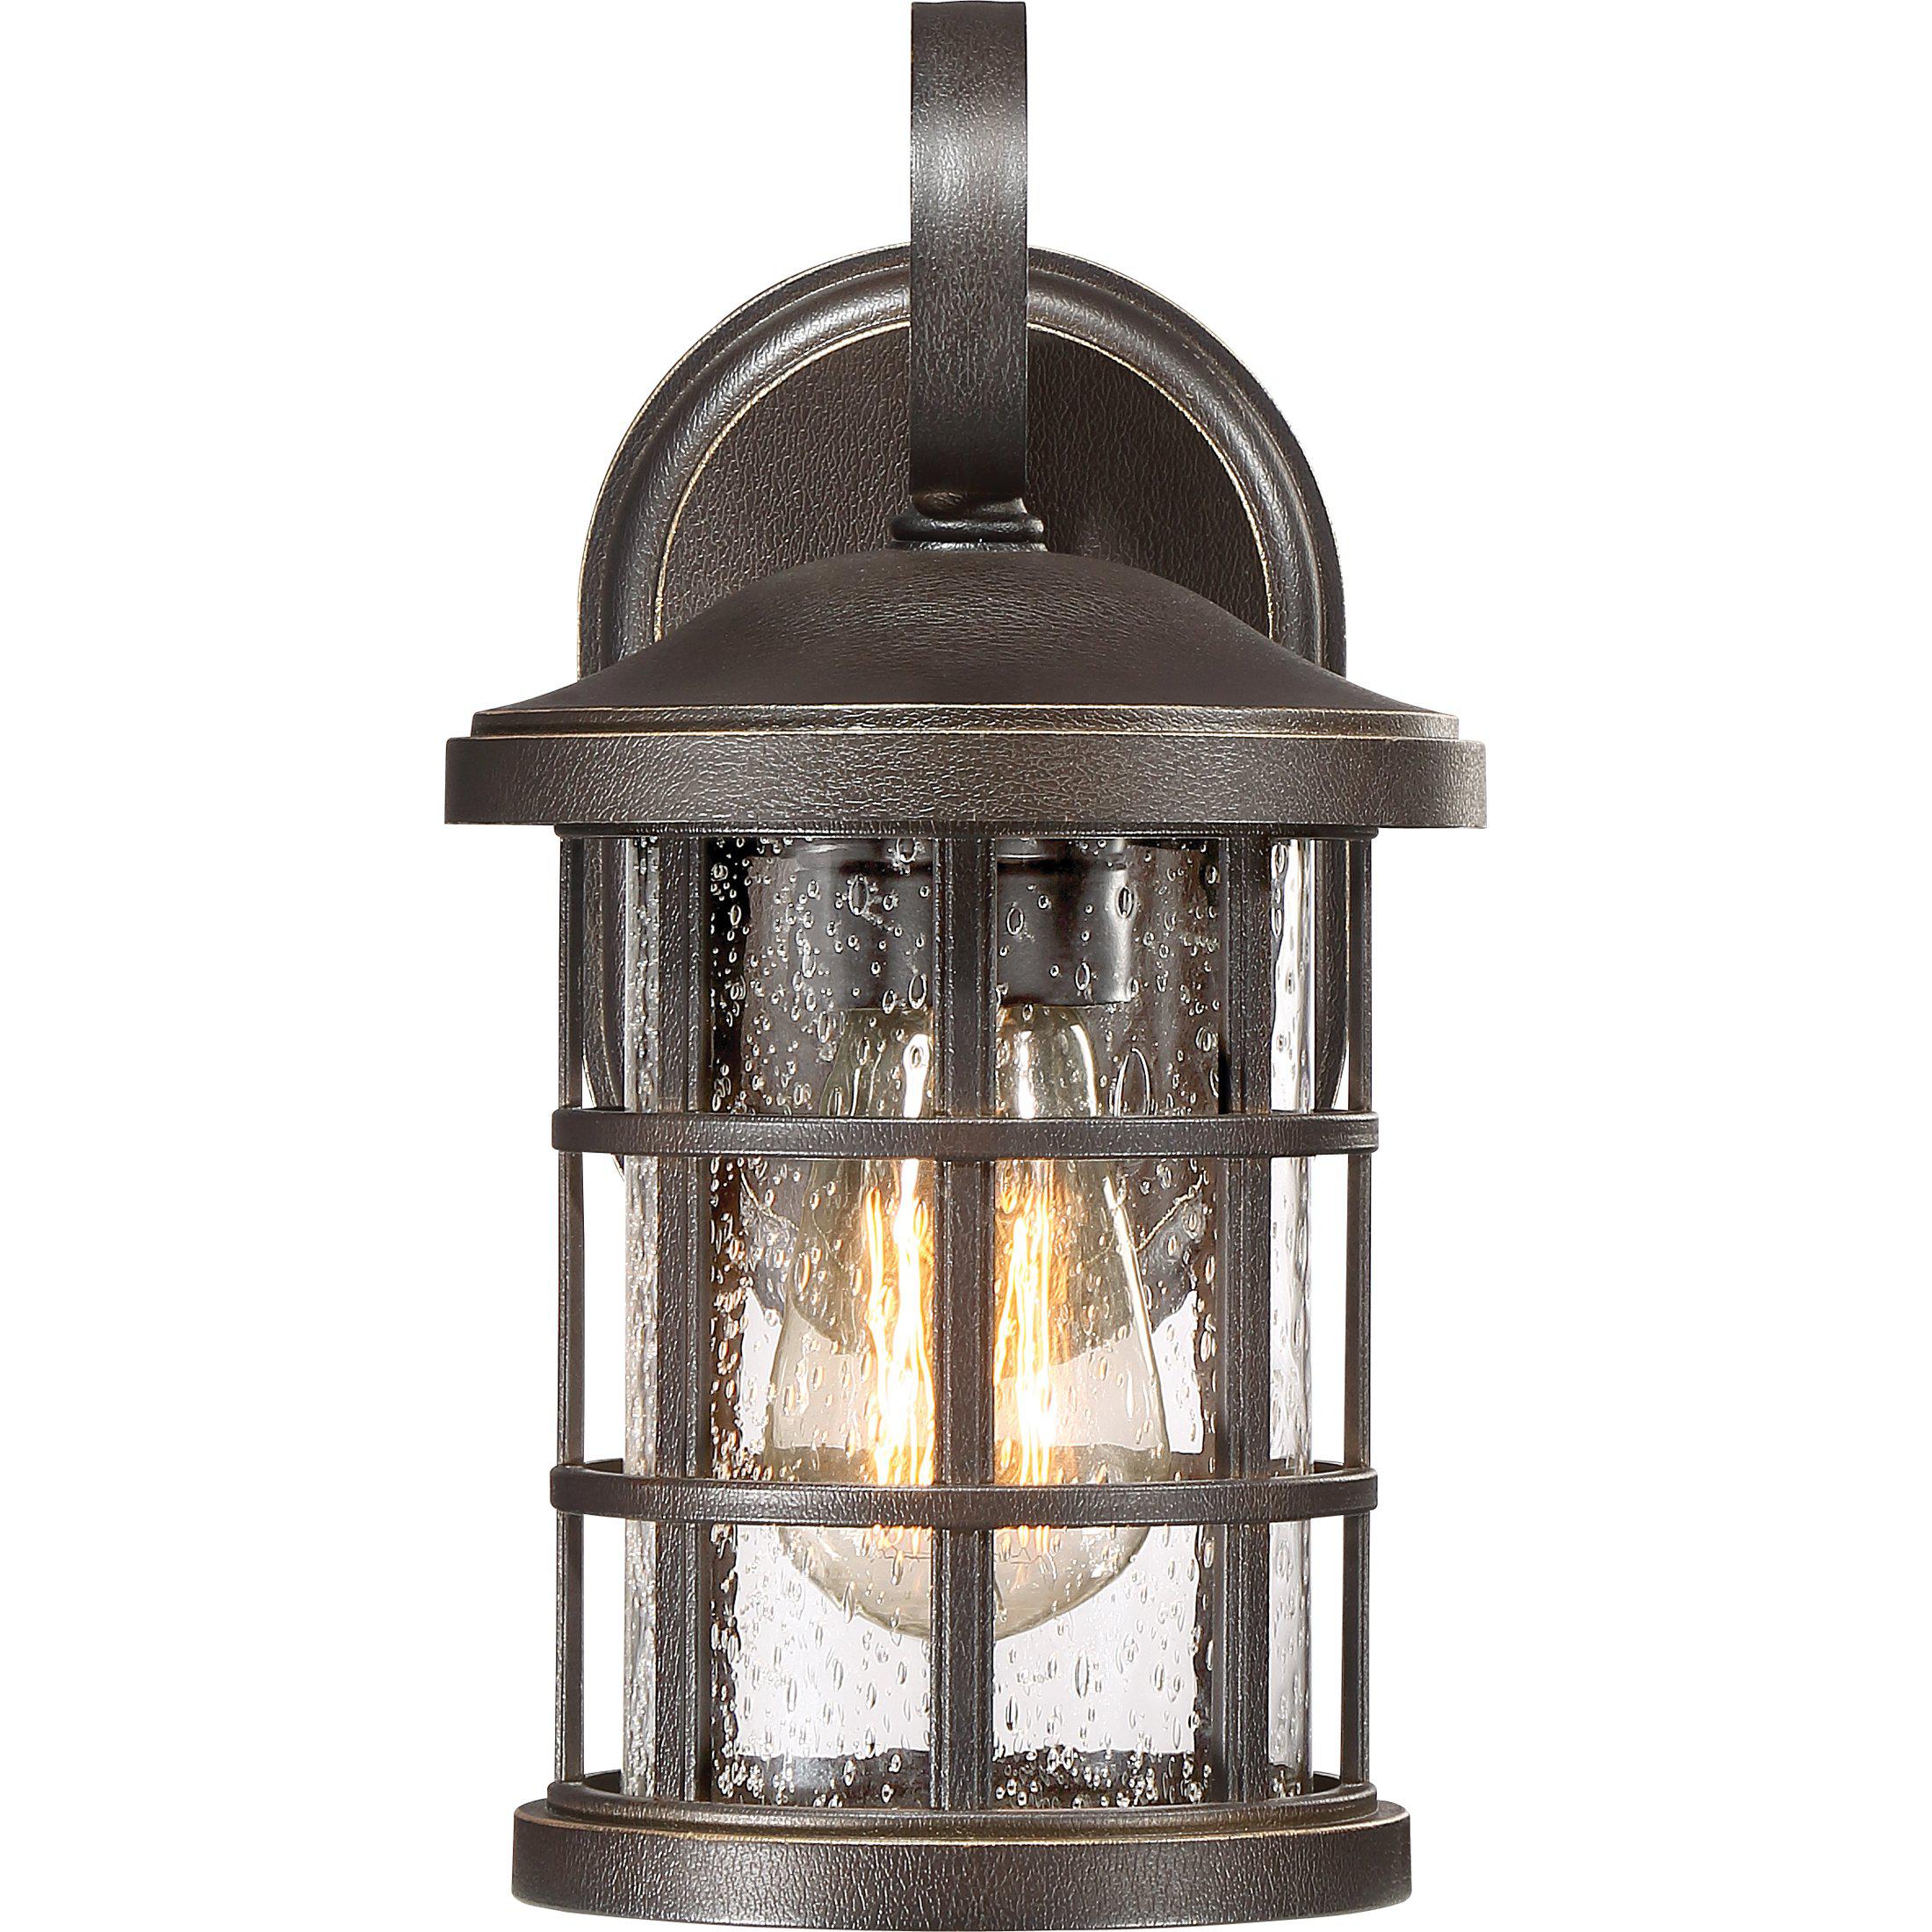 Quoizel  Crusade Outdoor Lantern, Small Outdoor l Wall Quoizel   